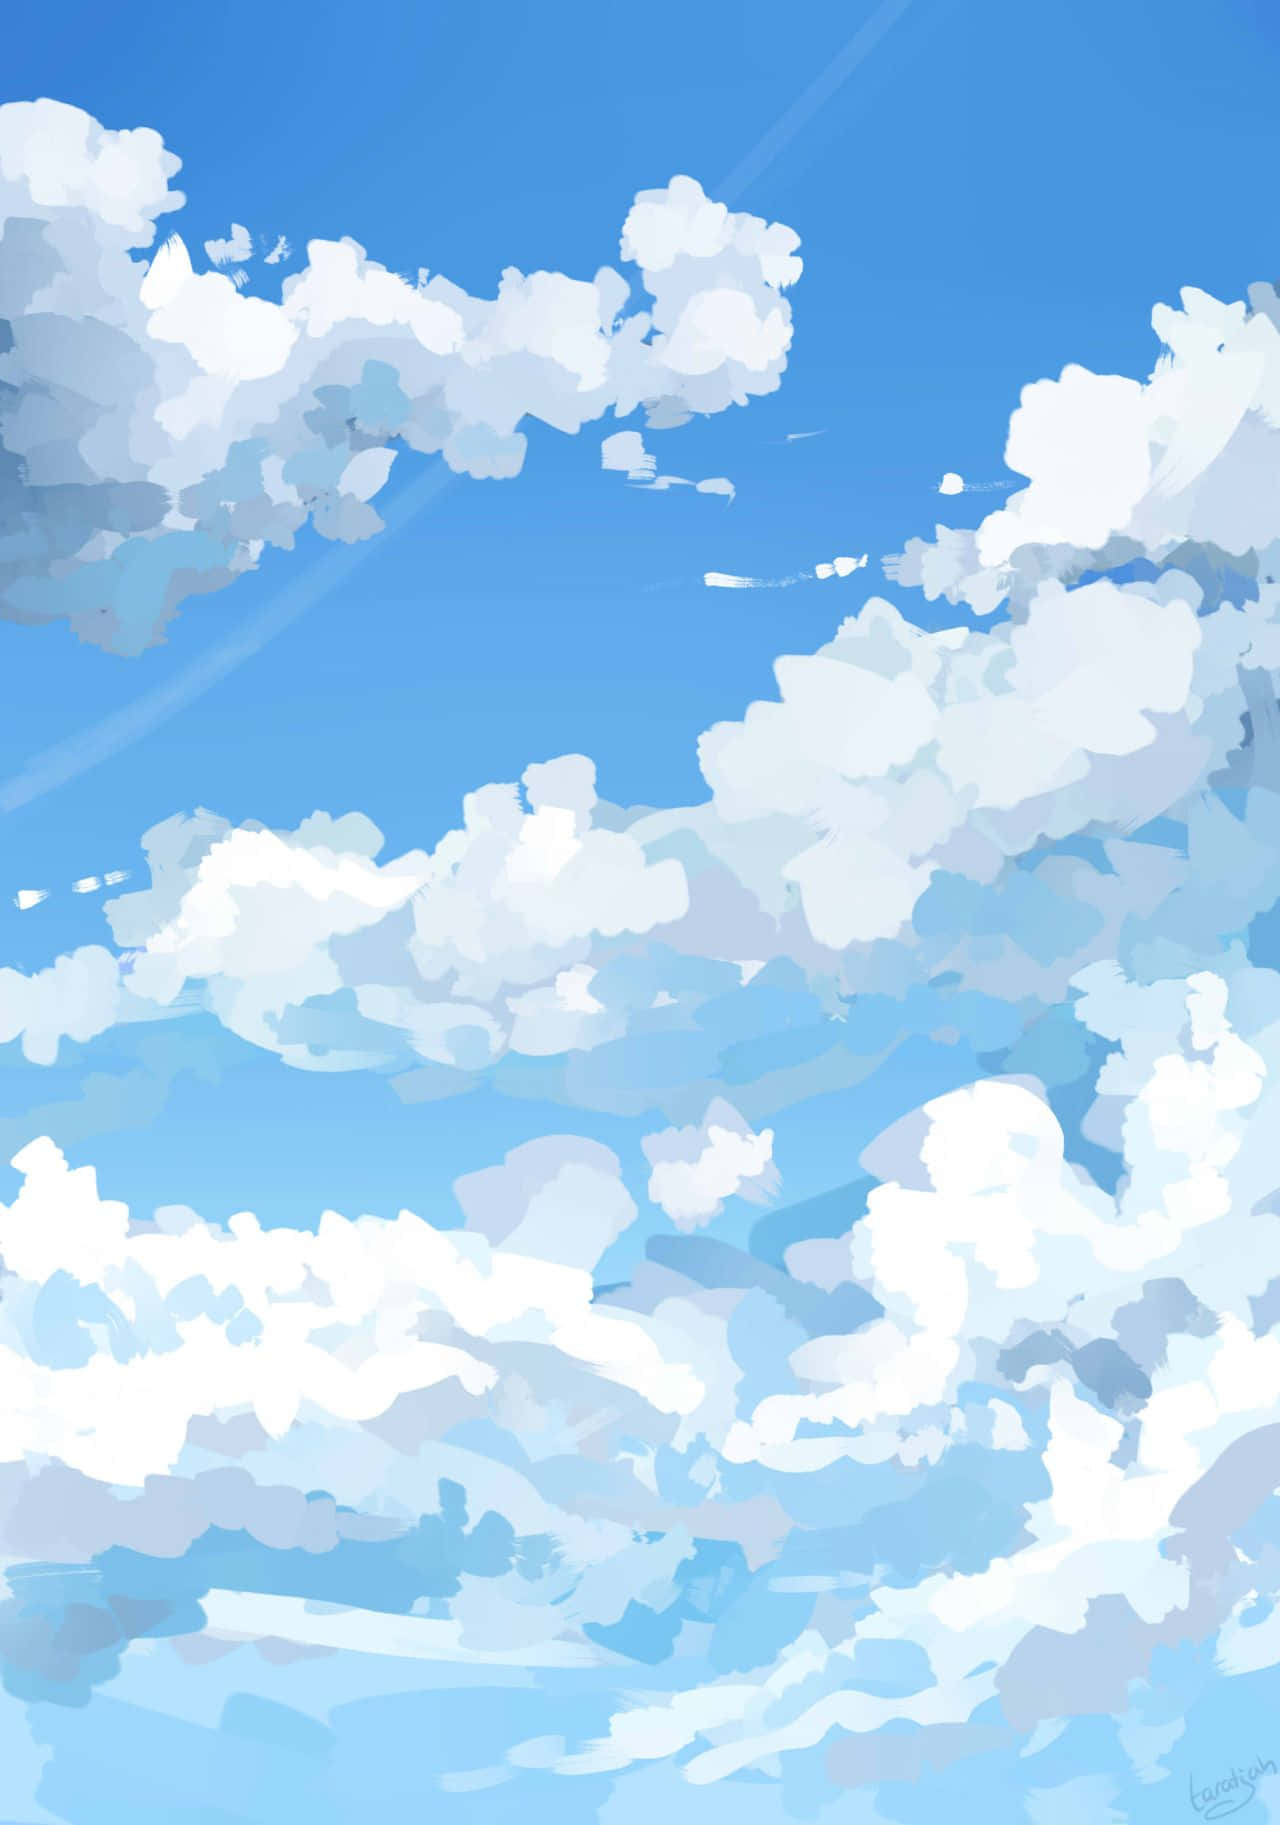 Realistic Cloud Painting Aesthetic Light Blue Background